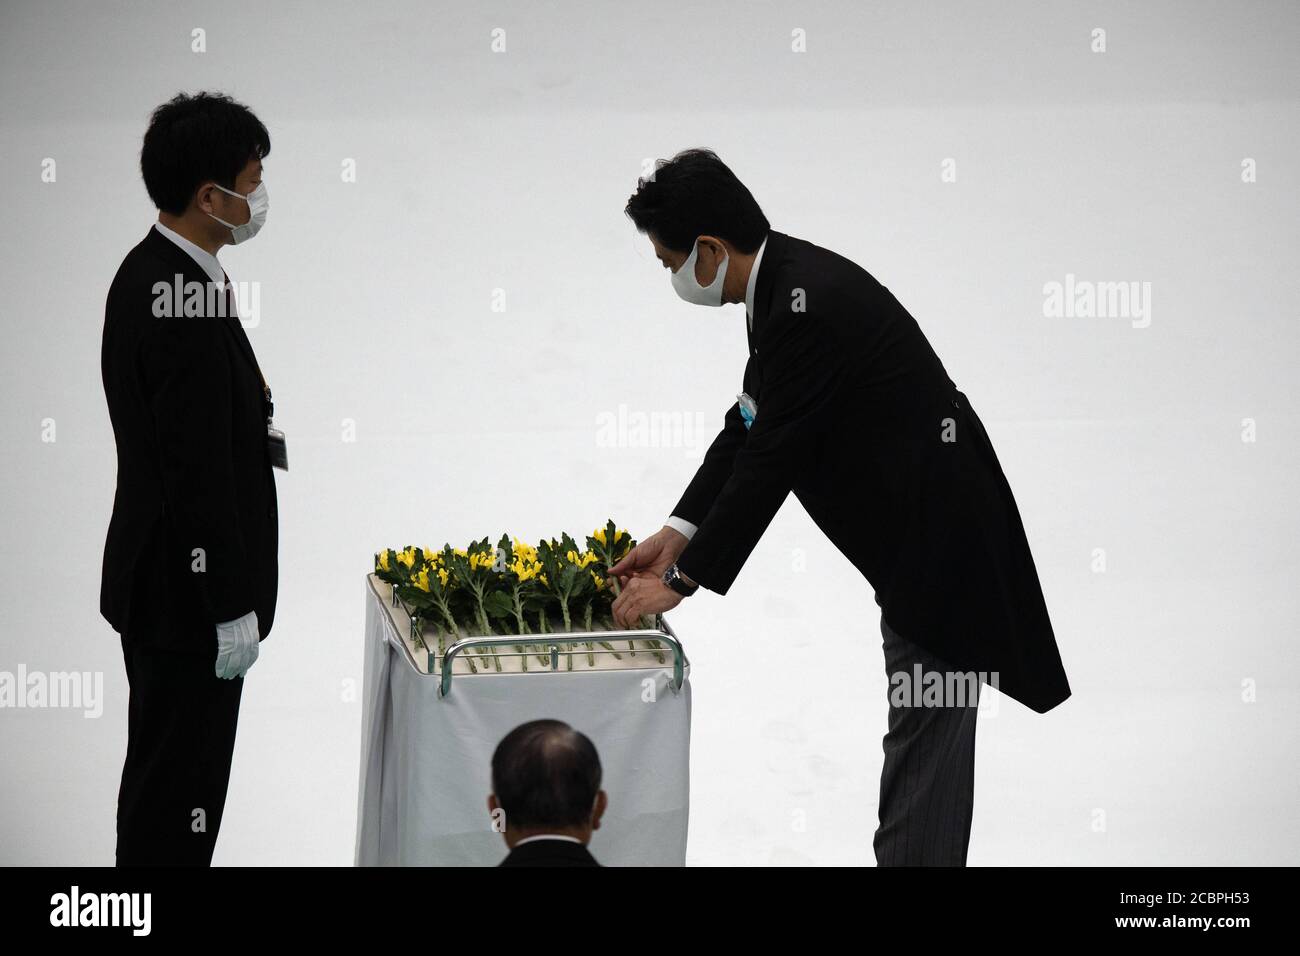 Tokyo, Japan. 15th Aug, 2020. TOKYO, JAPAN - AUGUST 15: Japan's Japan's Prime Minister, Shinzo Abe, prepares to lay a flower during a memorial service marking the 75th anniversary of Japan's surrender in World War II at the Nippon Budokan hall on August 15, 2020 in Tokyo, Japan. 75 years ago today and following the atomic bomb attacks on Hiroshima and Nagasaki, former emperor Hirohito formally announced Japan's surrender to allied forces, bringing the hostilities of World War II to an end. Credit: POOL/ZUMA Wire/Alamy Live News Stock Photo